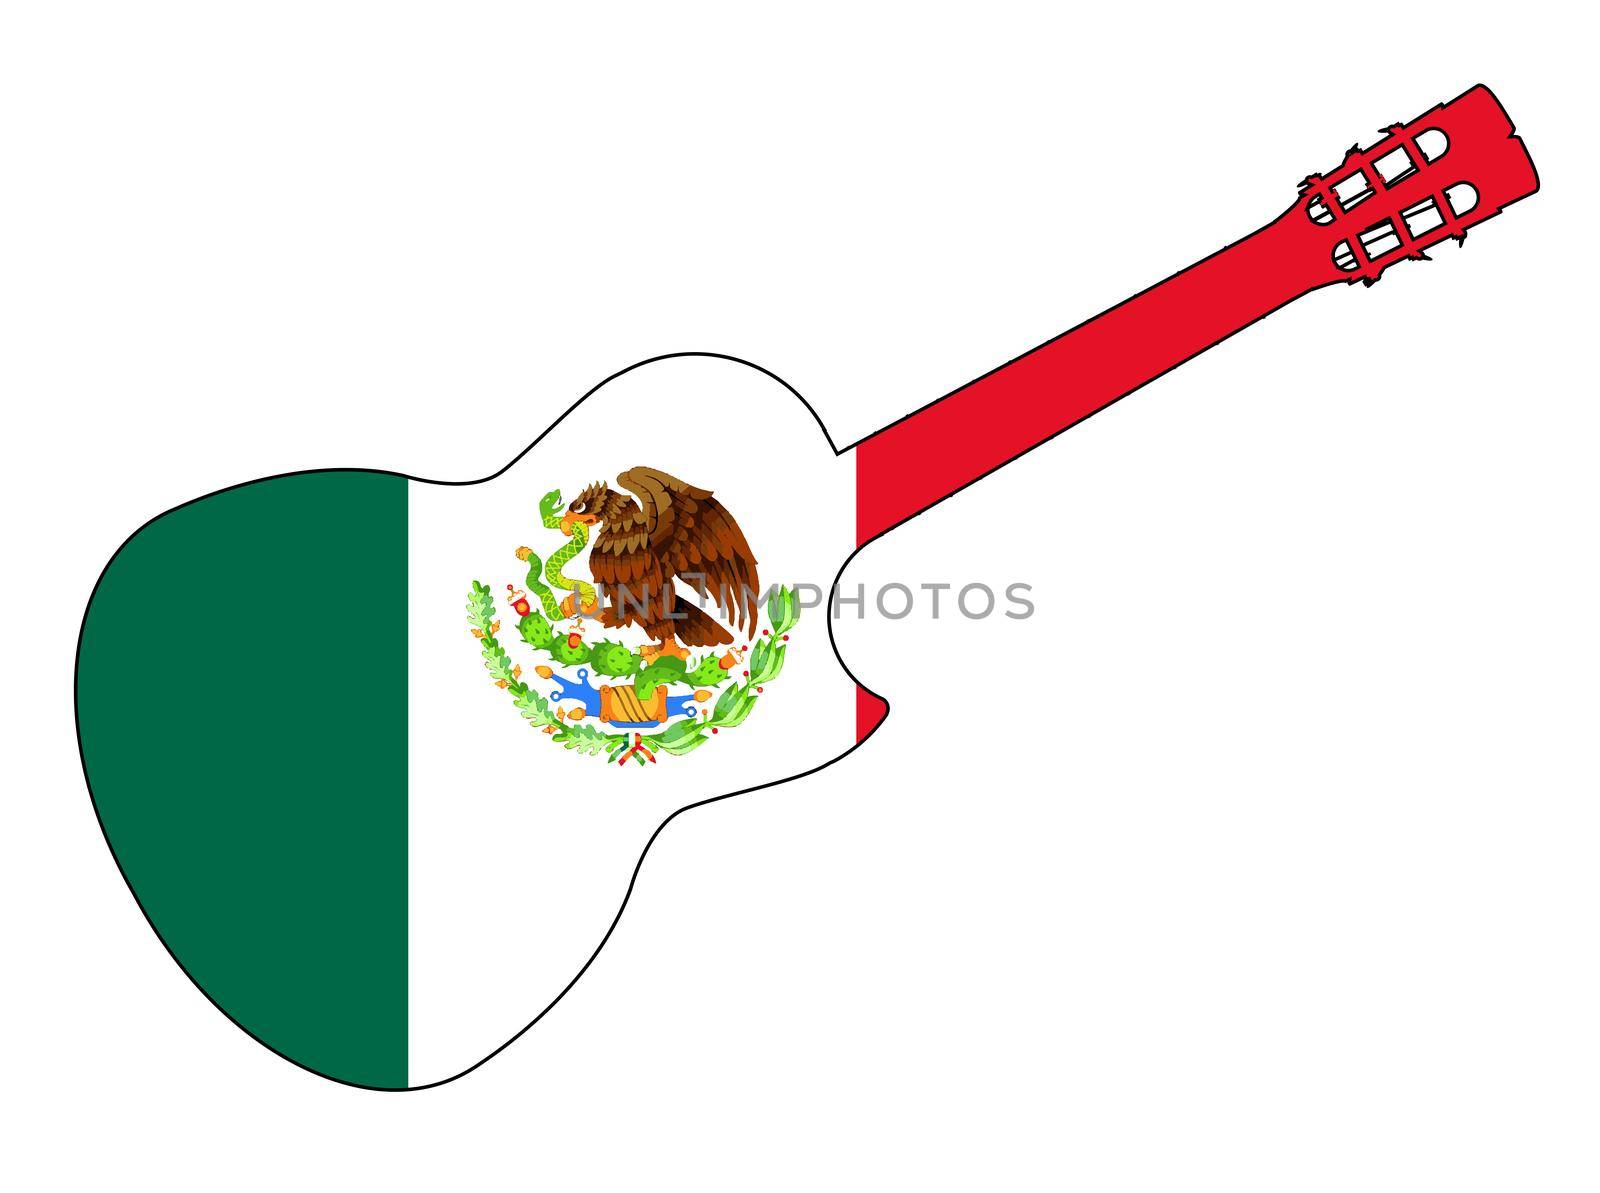 Spanish Cutaway Acoustic Guitar On Flag Of Mexico by Bigalbaloo